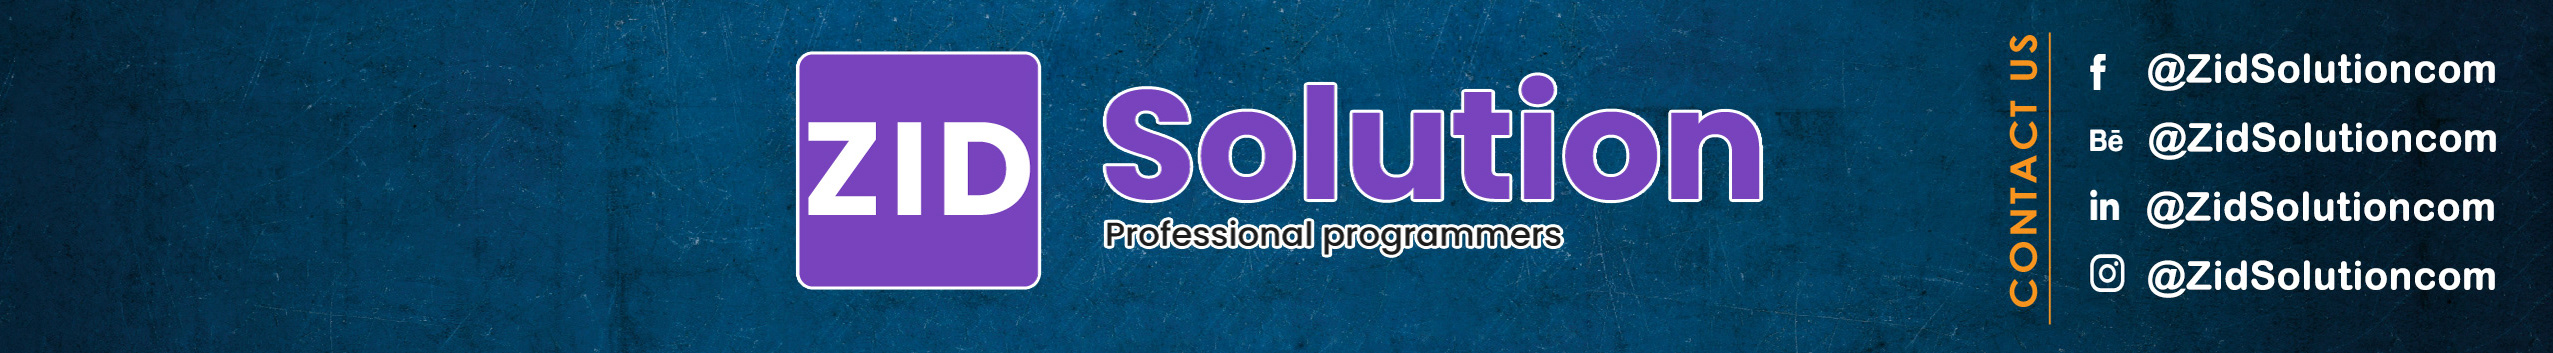 Zid Solution's profile banner